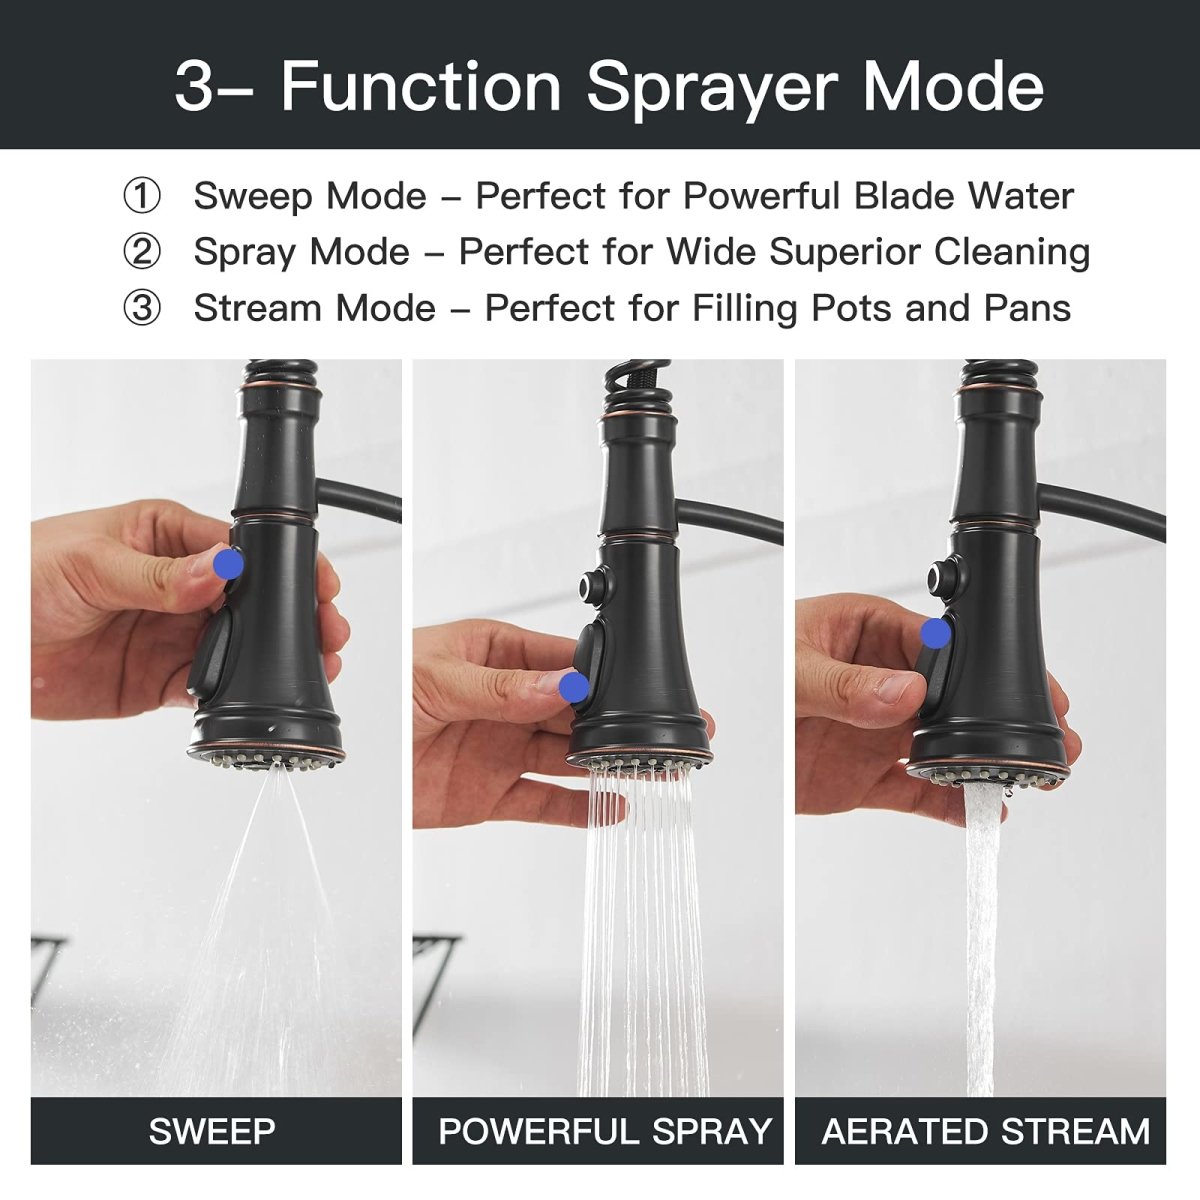 Sprayer 3 Spray Pull-Down Kitchen Faucet Oil Rubbed Bronze - buyfaucet.com